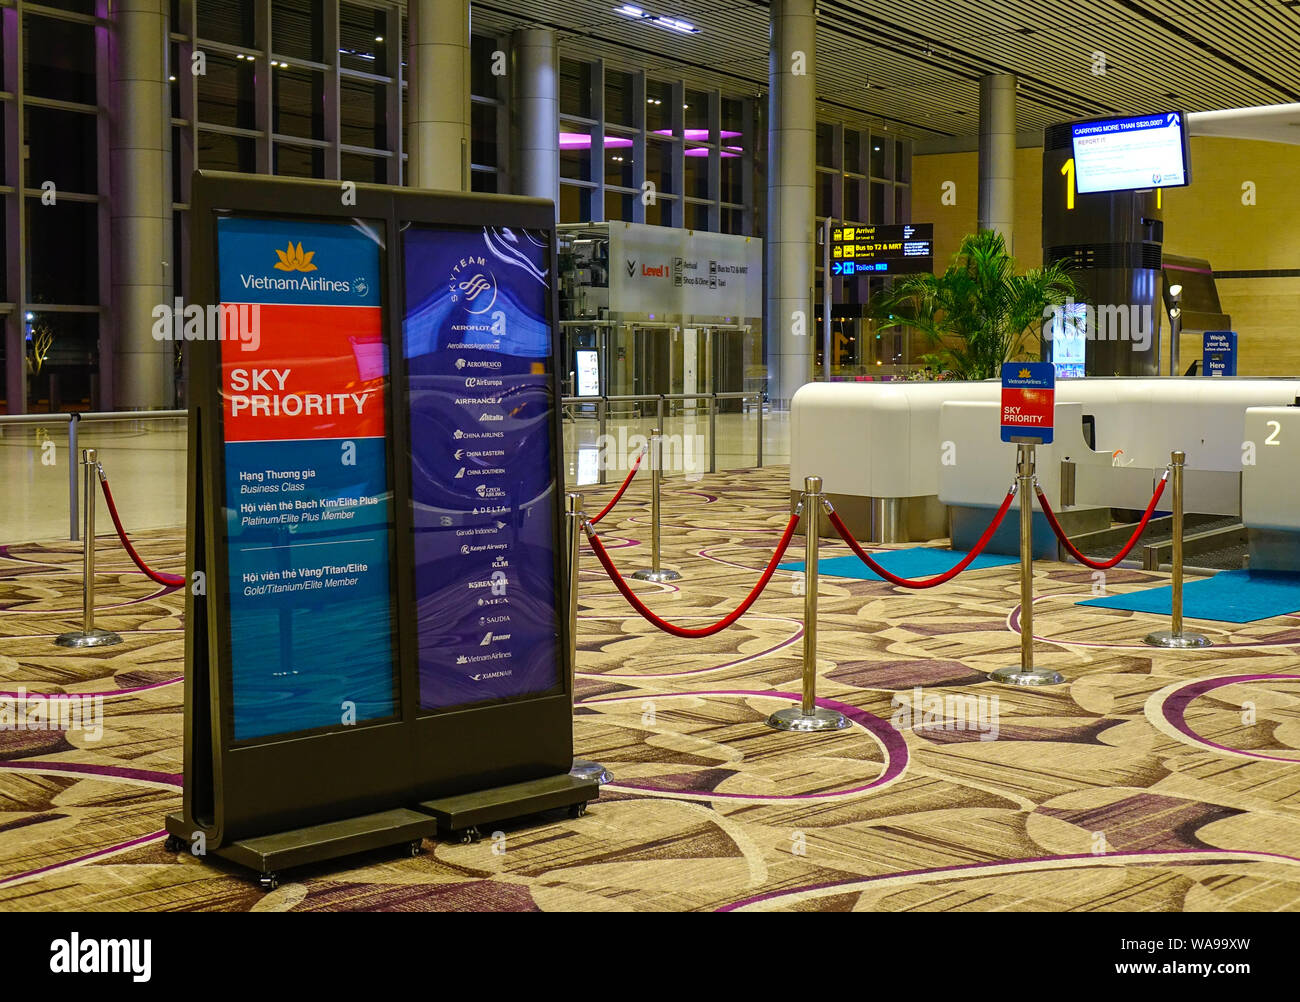 Singapore - Mar 28, 2019. Check-in Counters of Vietnam Airlines at Terminal 4 of Changi Airport (SIN). Terminal 4 officially opened on October 2017. Stock Photo